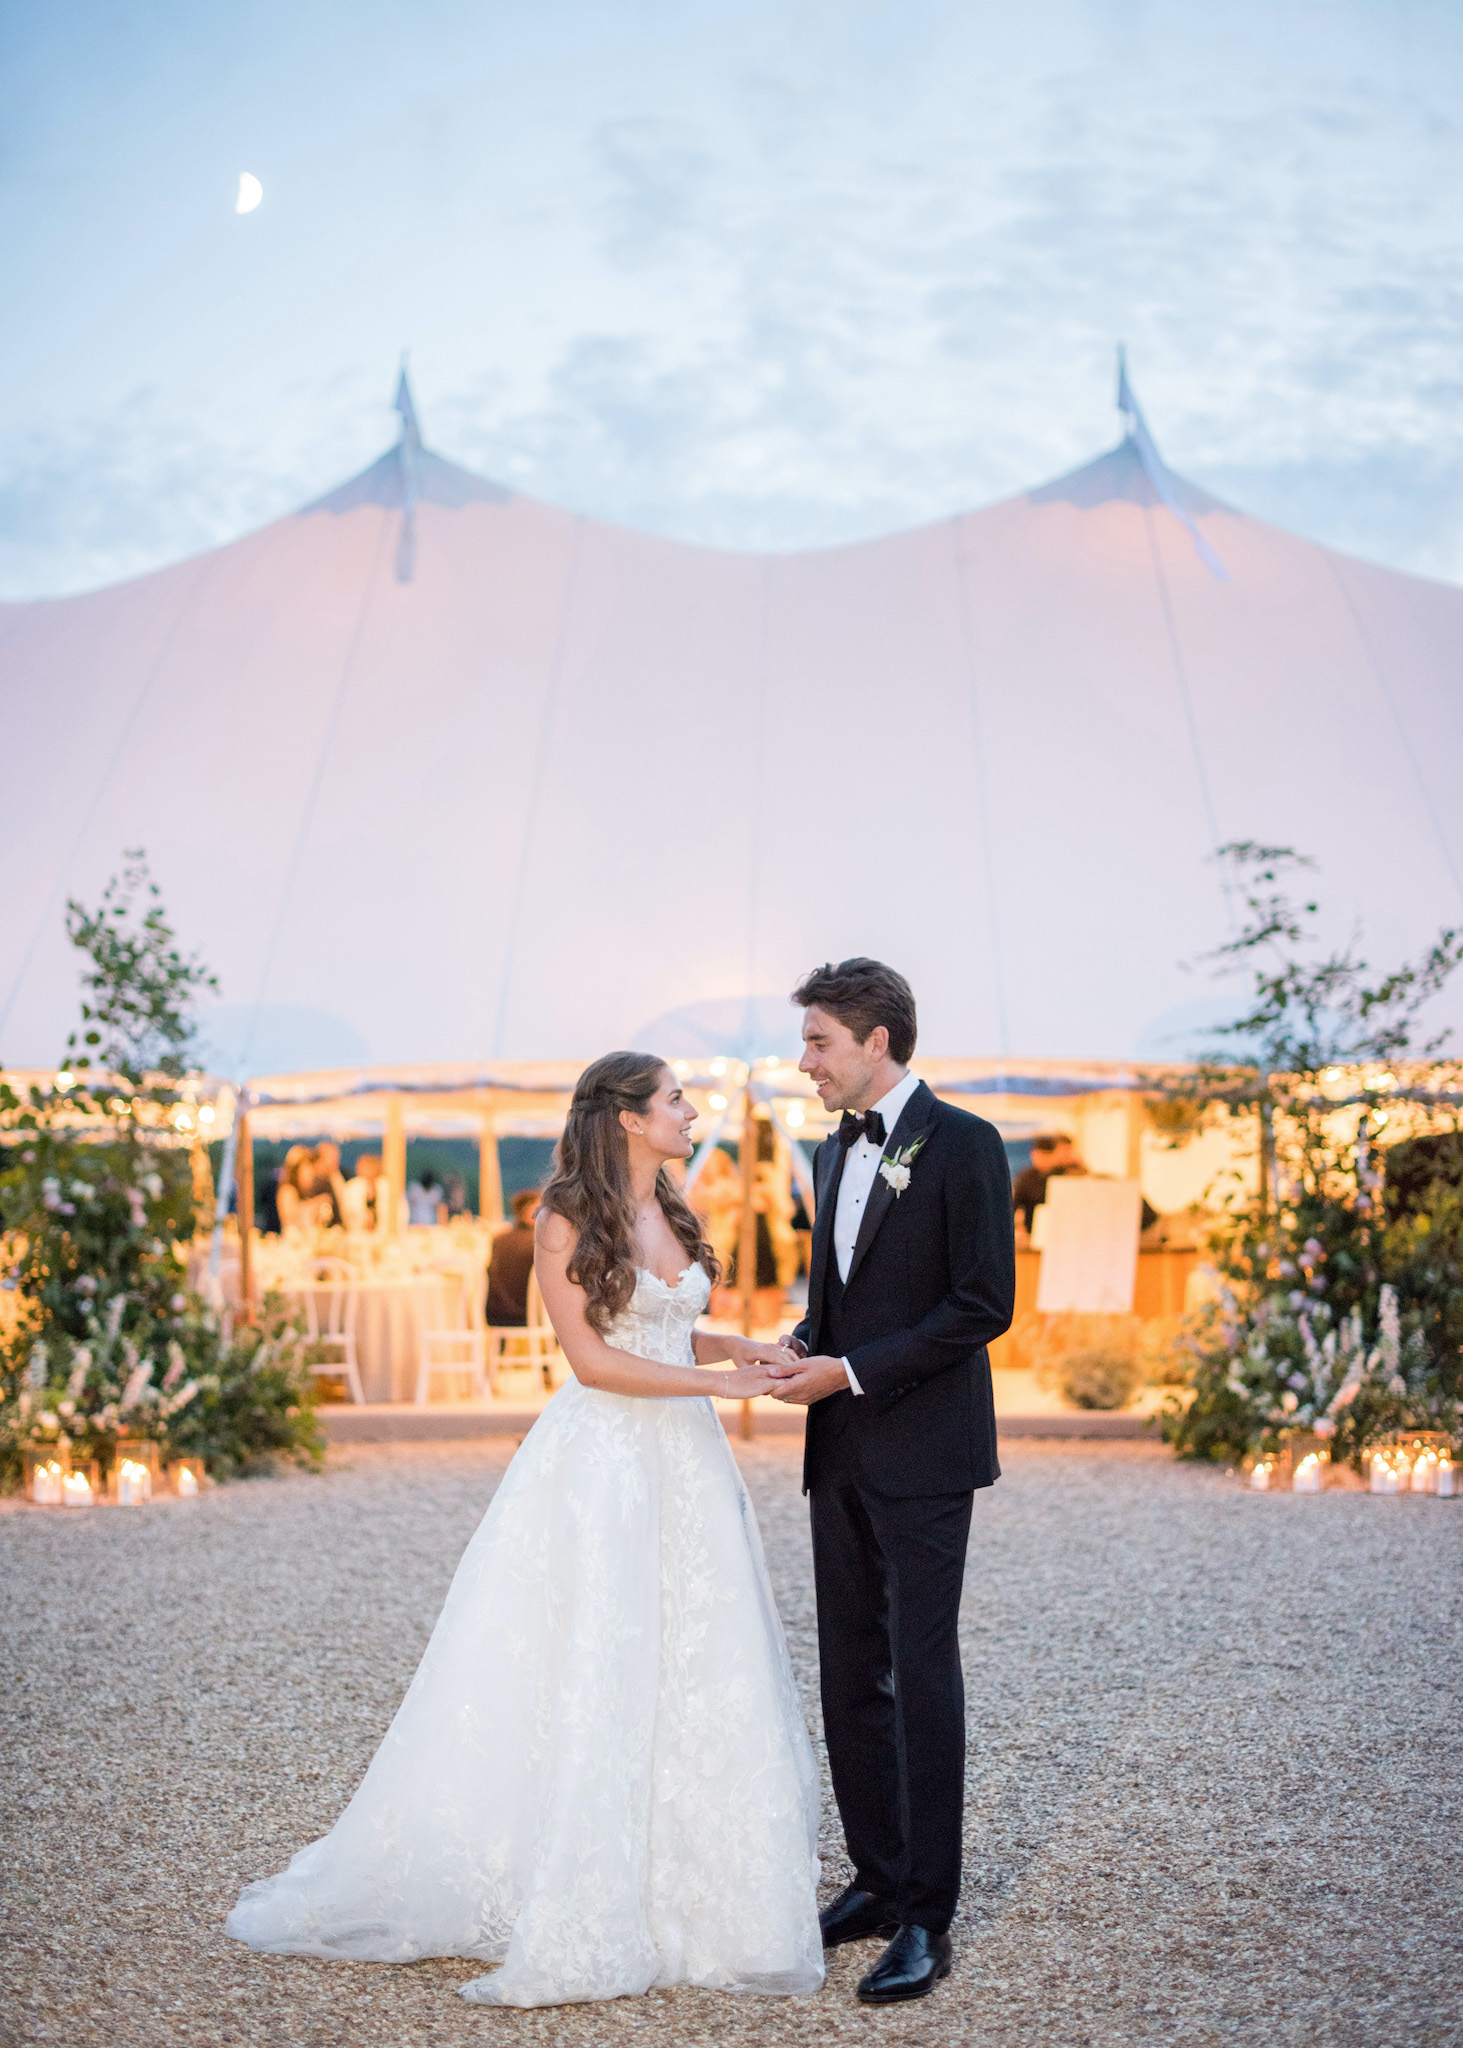 Newly weds Ellie and Sam in front of their Sperry Tent, designed by Katrina Otter Weddings with The Sail Tent Company.